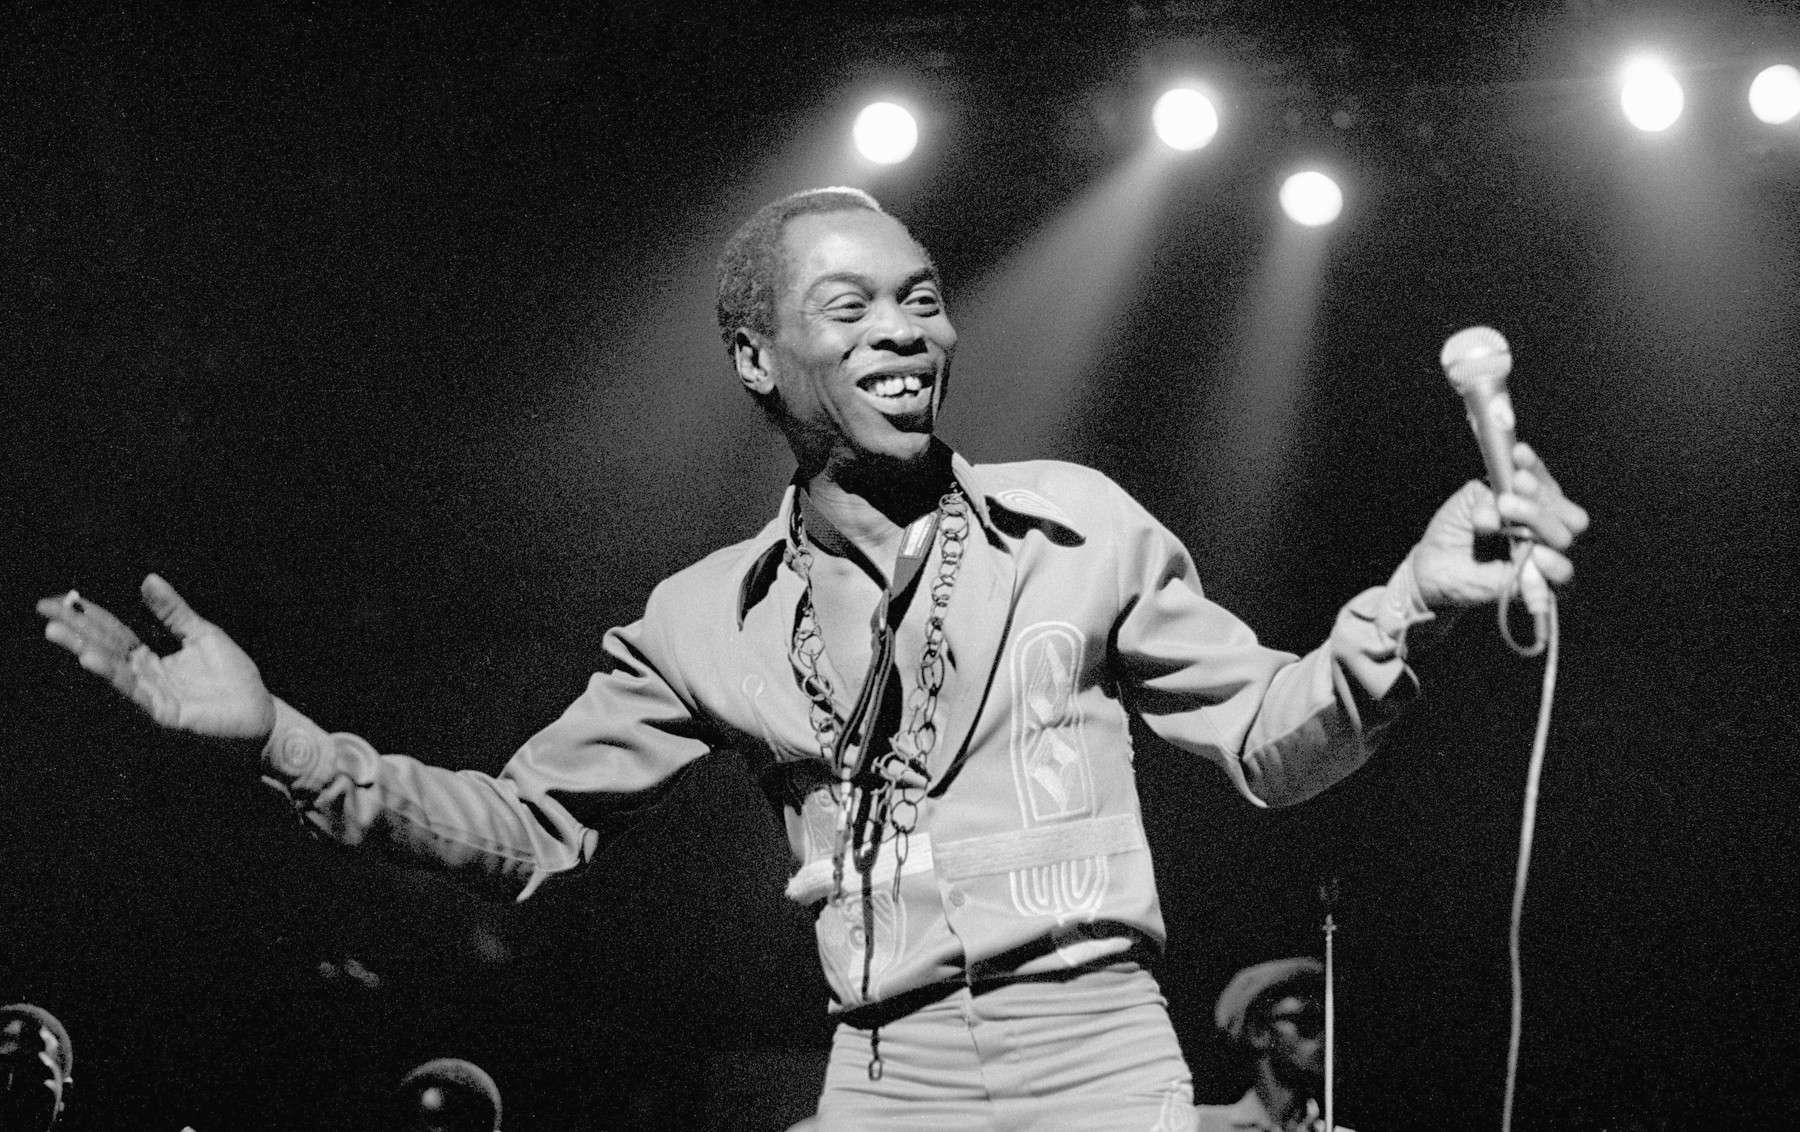 Fela Kuti toured Europe and the United States throughout the 1980s.